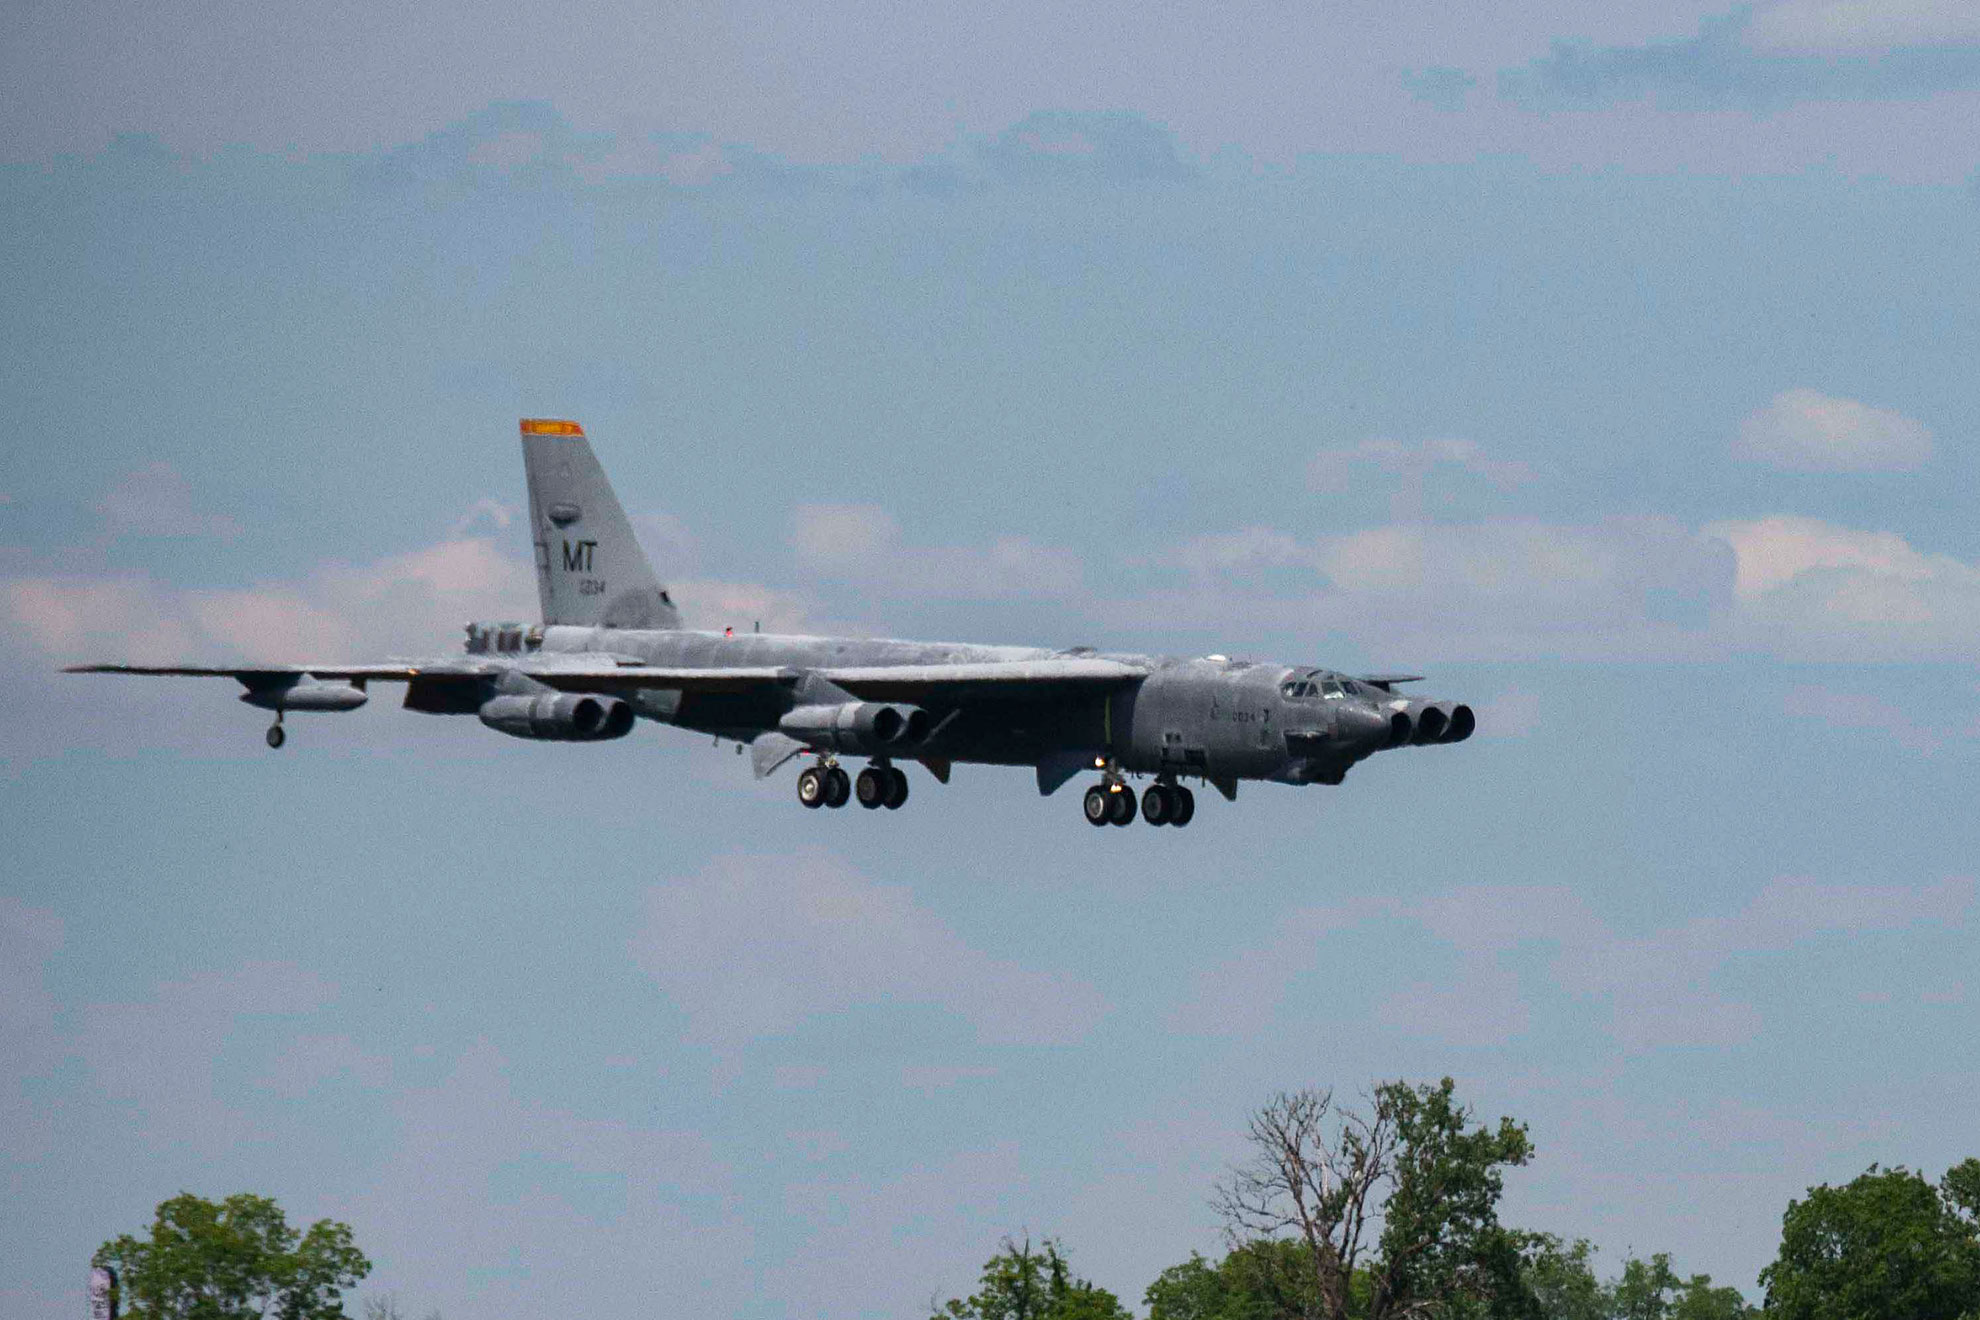 A B-52 Stratofortress, nicknamed "Wise Guy," makes its final approach to Barksdale AFB, La., May 14, 2019. The bomber was flown out of the 309th Aerospace Maintenance and Regeneration Group, also known as the "Boneyard," where it had been since 2008 -- U.S. Air Force photo by Master Sgt. Ted Daigle. -